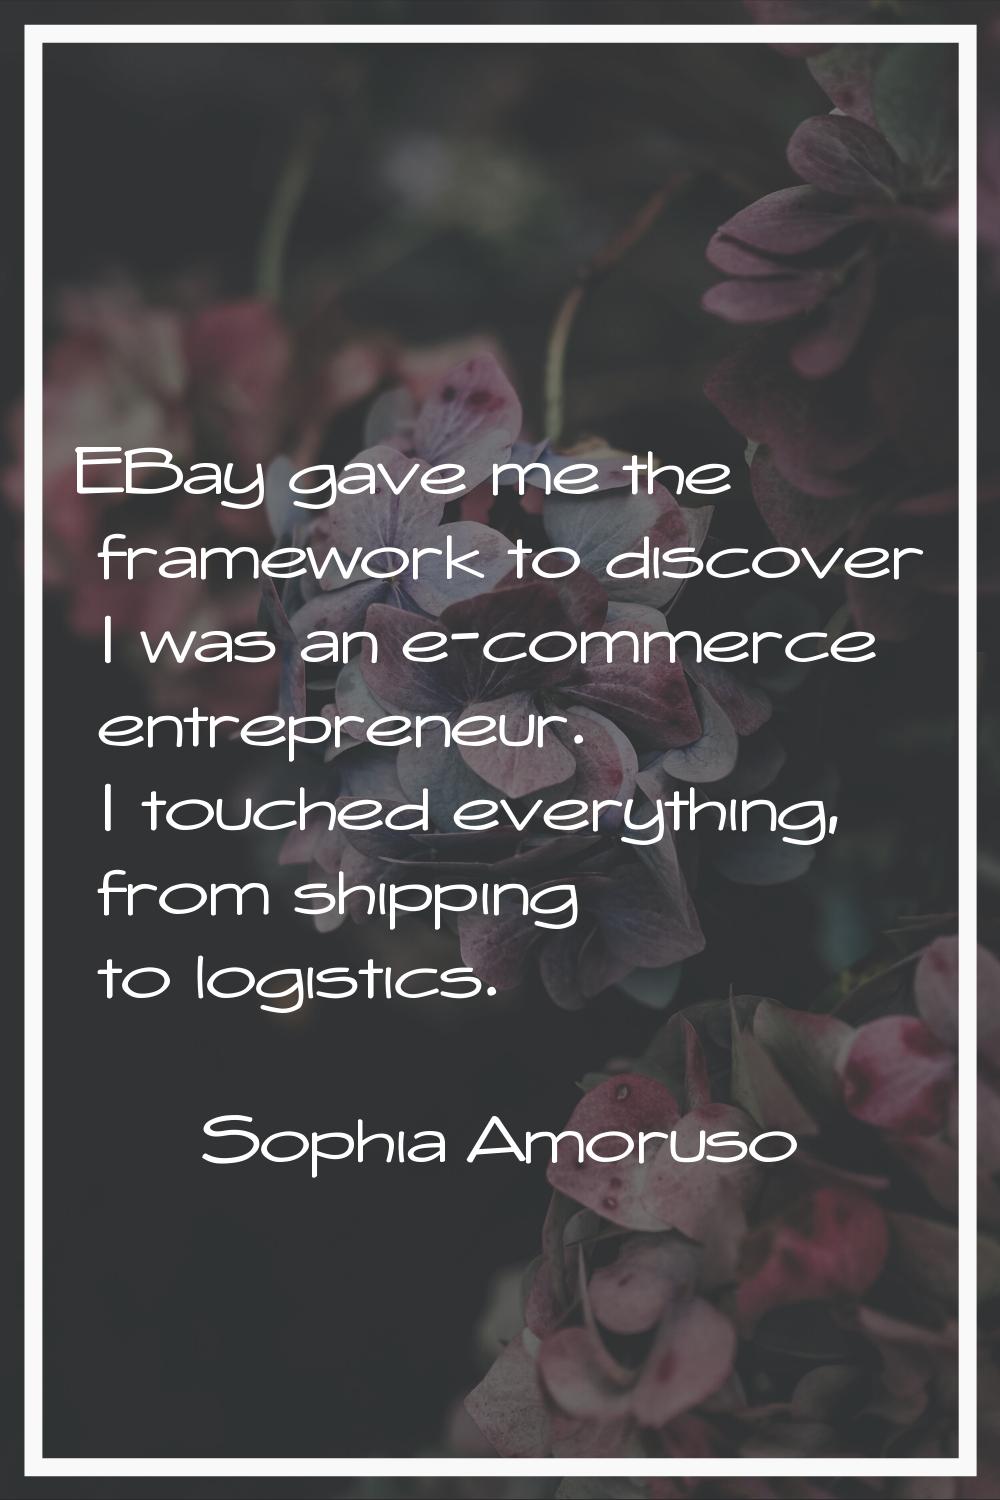 EBay gave me the framework to discover I was an e-commerce entrepreneur. I touched everything, from